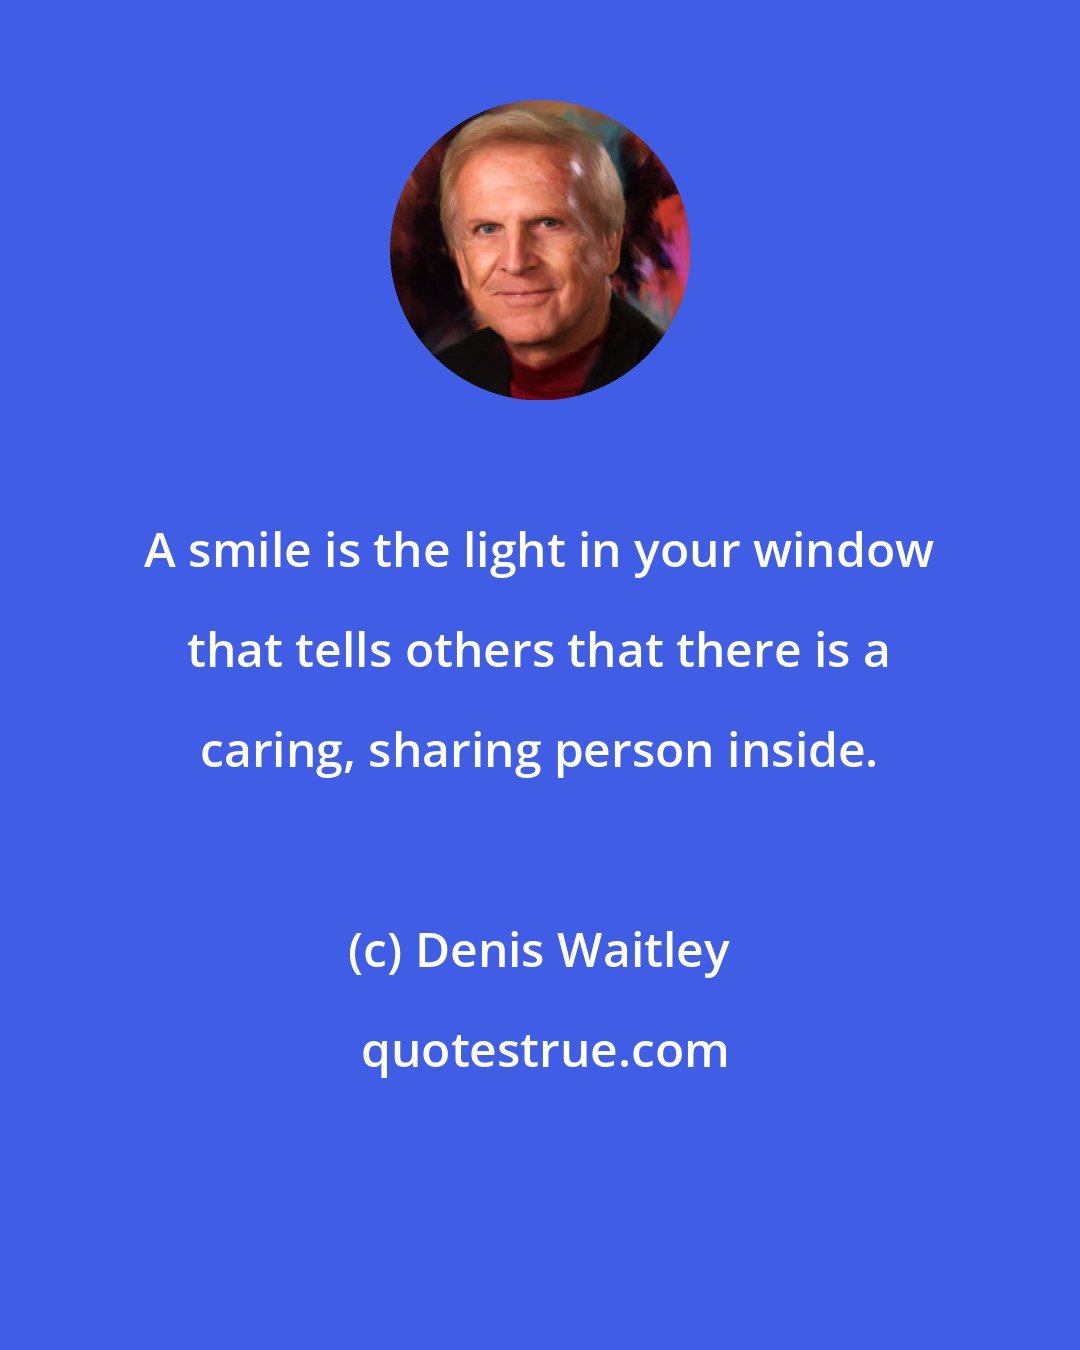 Denis Waitley: A smile is the light in your window that tells others that there is a caring, sharing person inside.